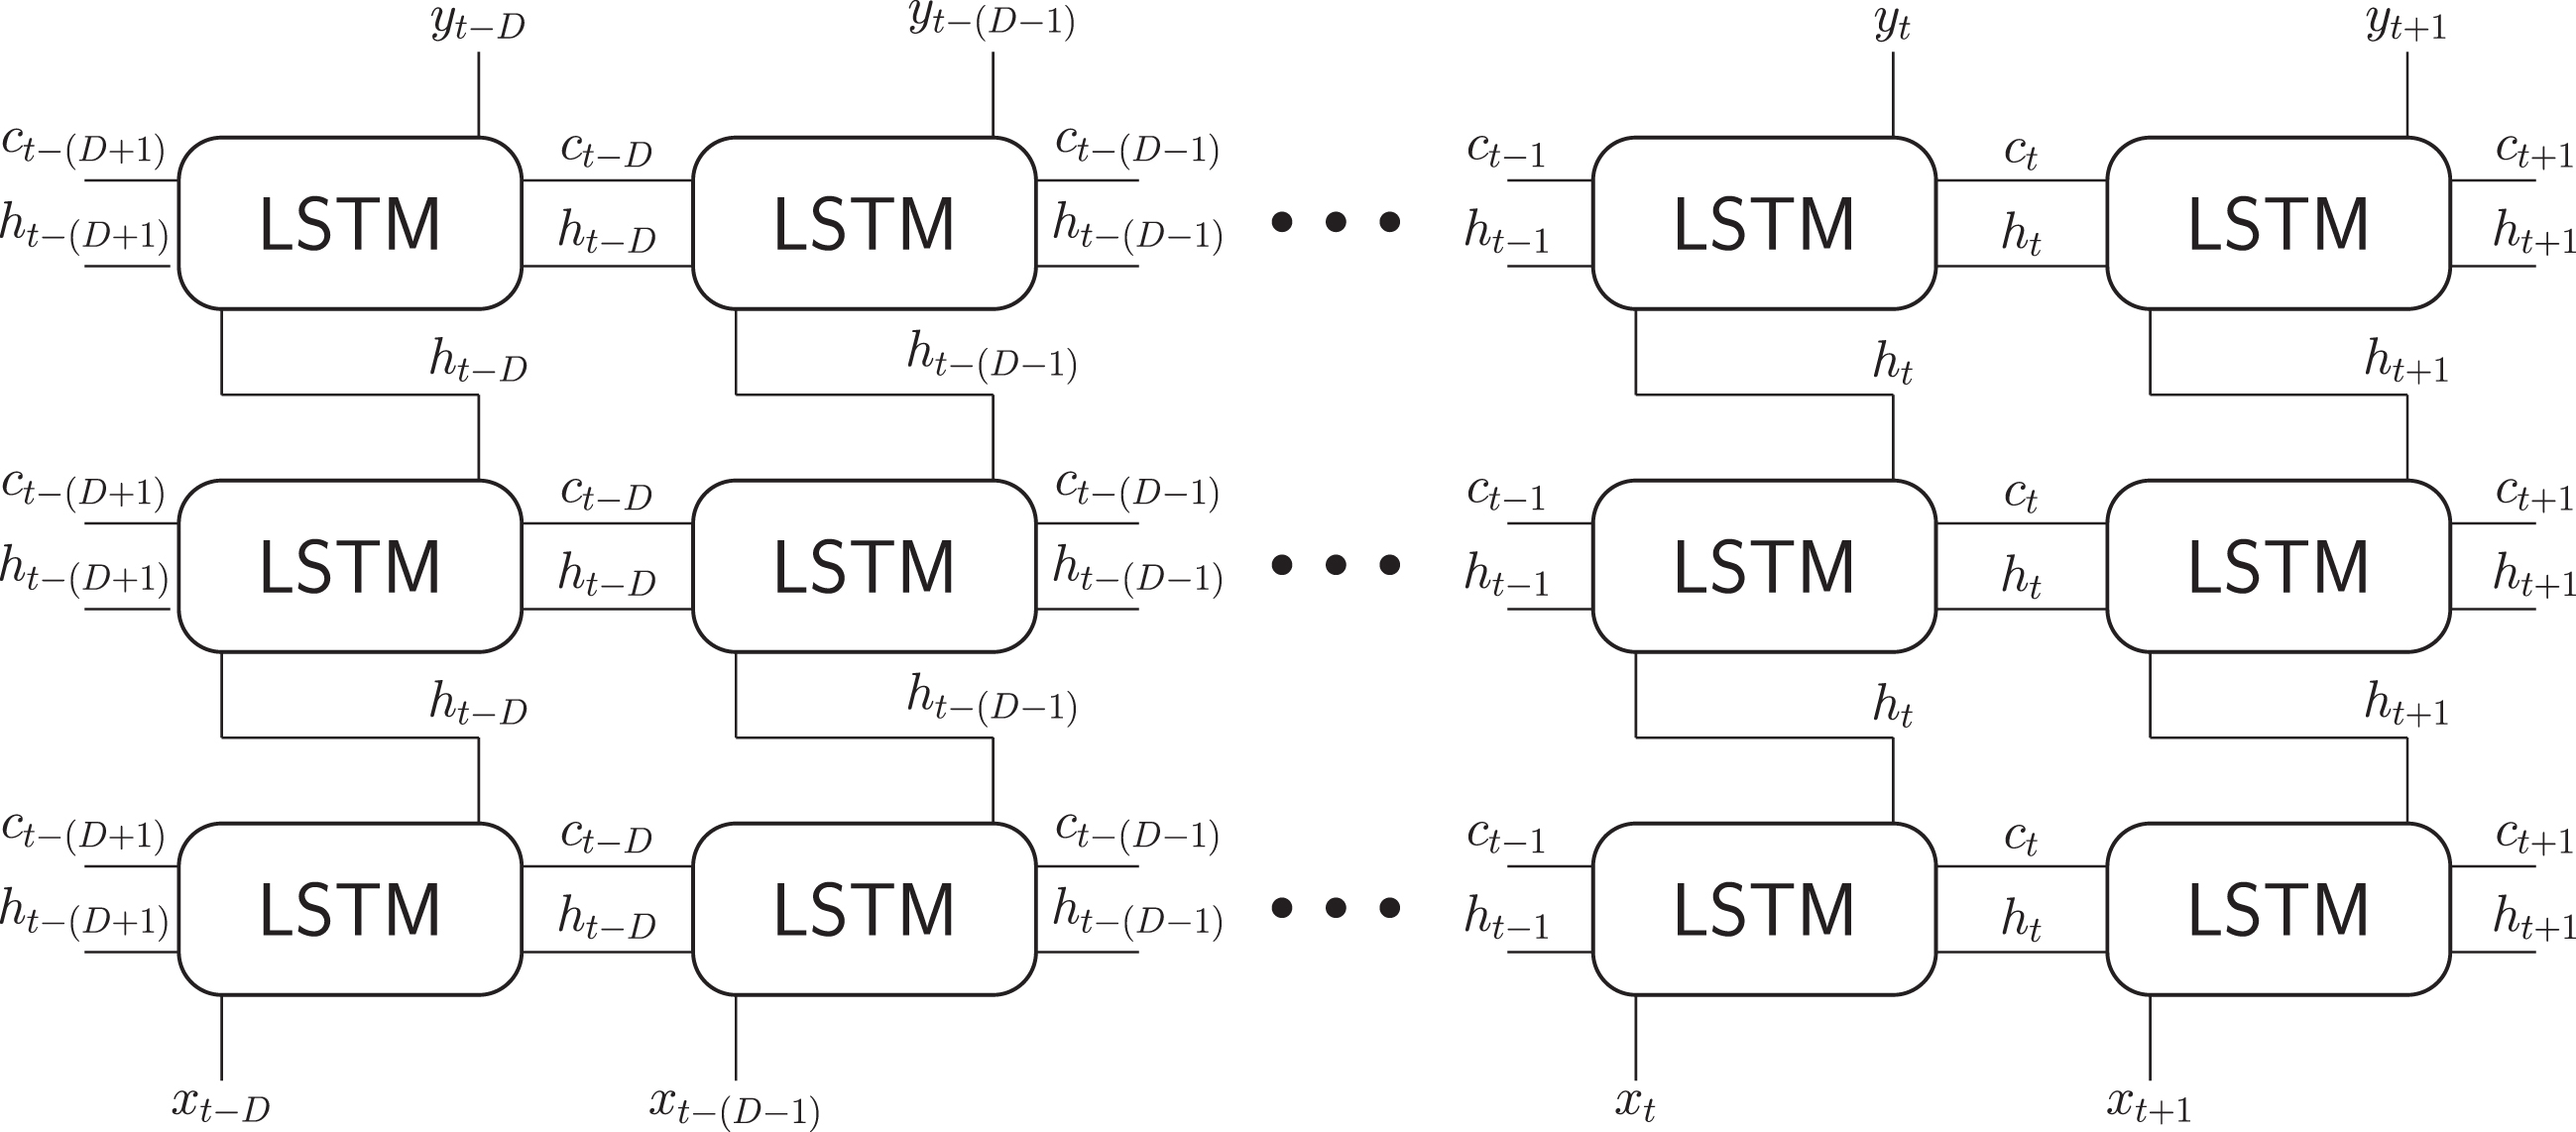 LSTM stacking scheme using 3 layers.